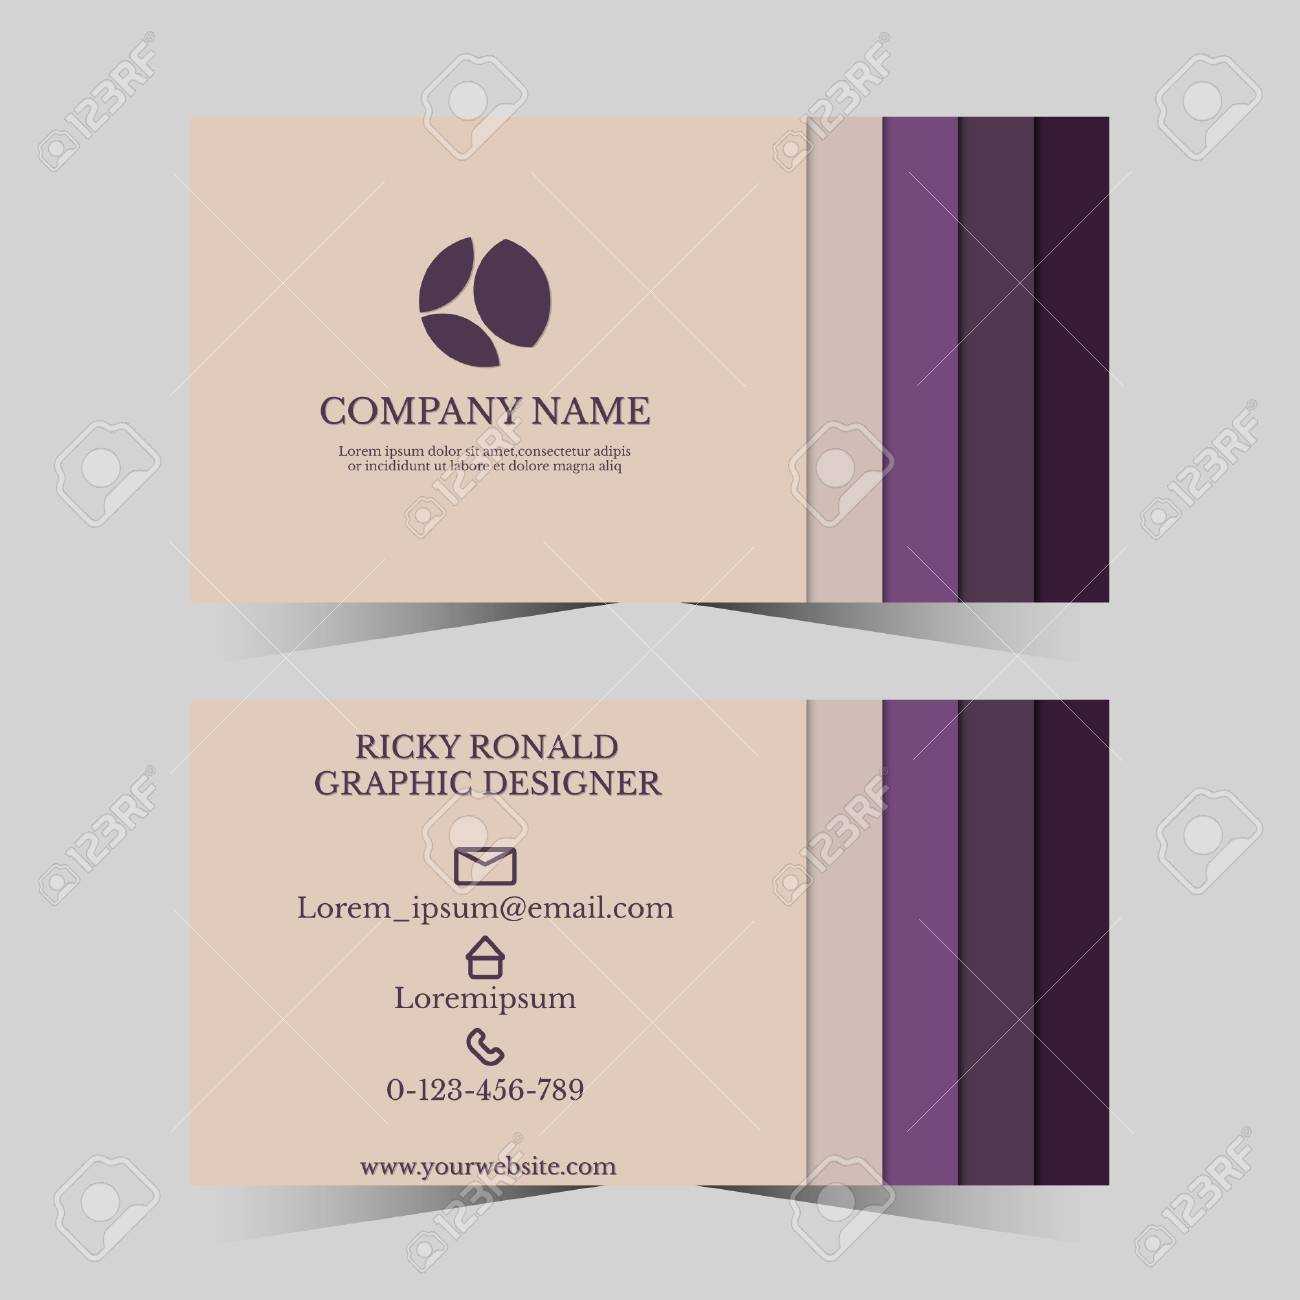 Calling Card Template For Business Man With Geometric Design Pertaining To Call Card Templates